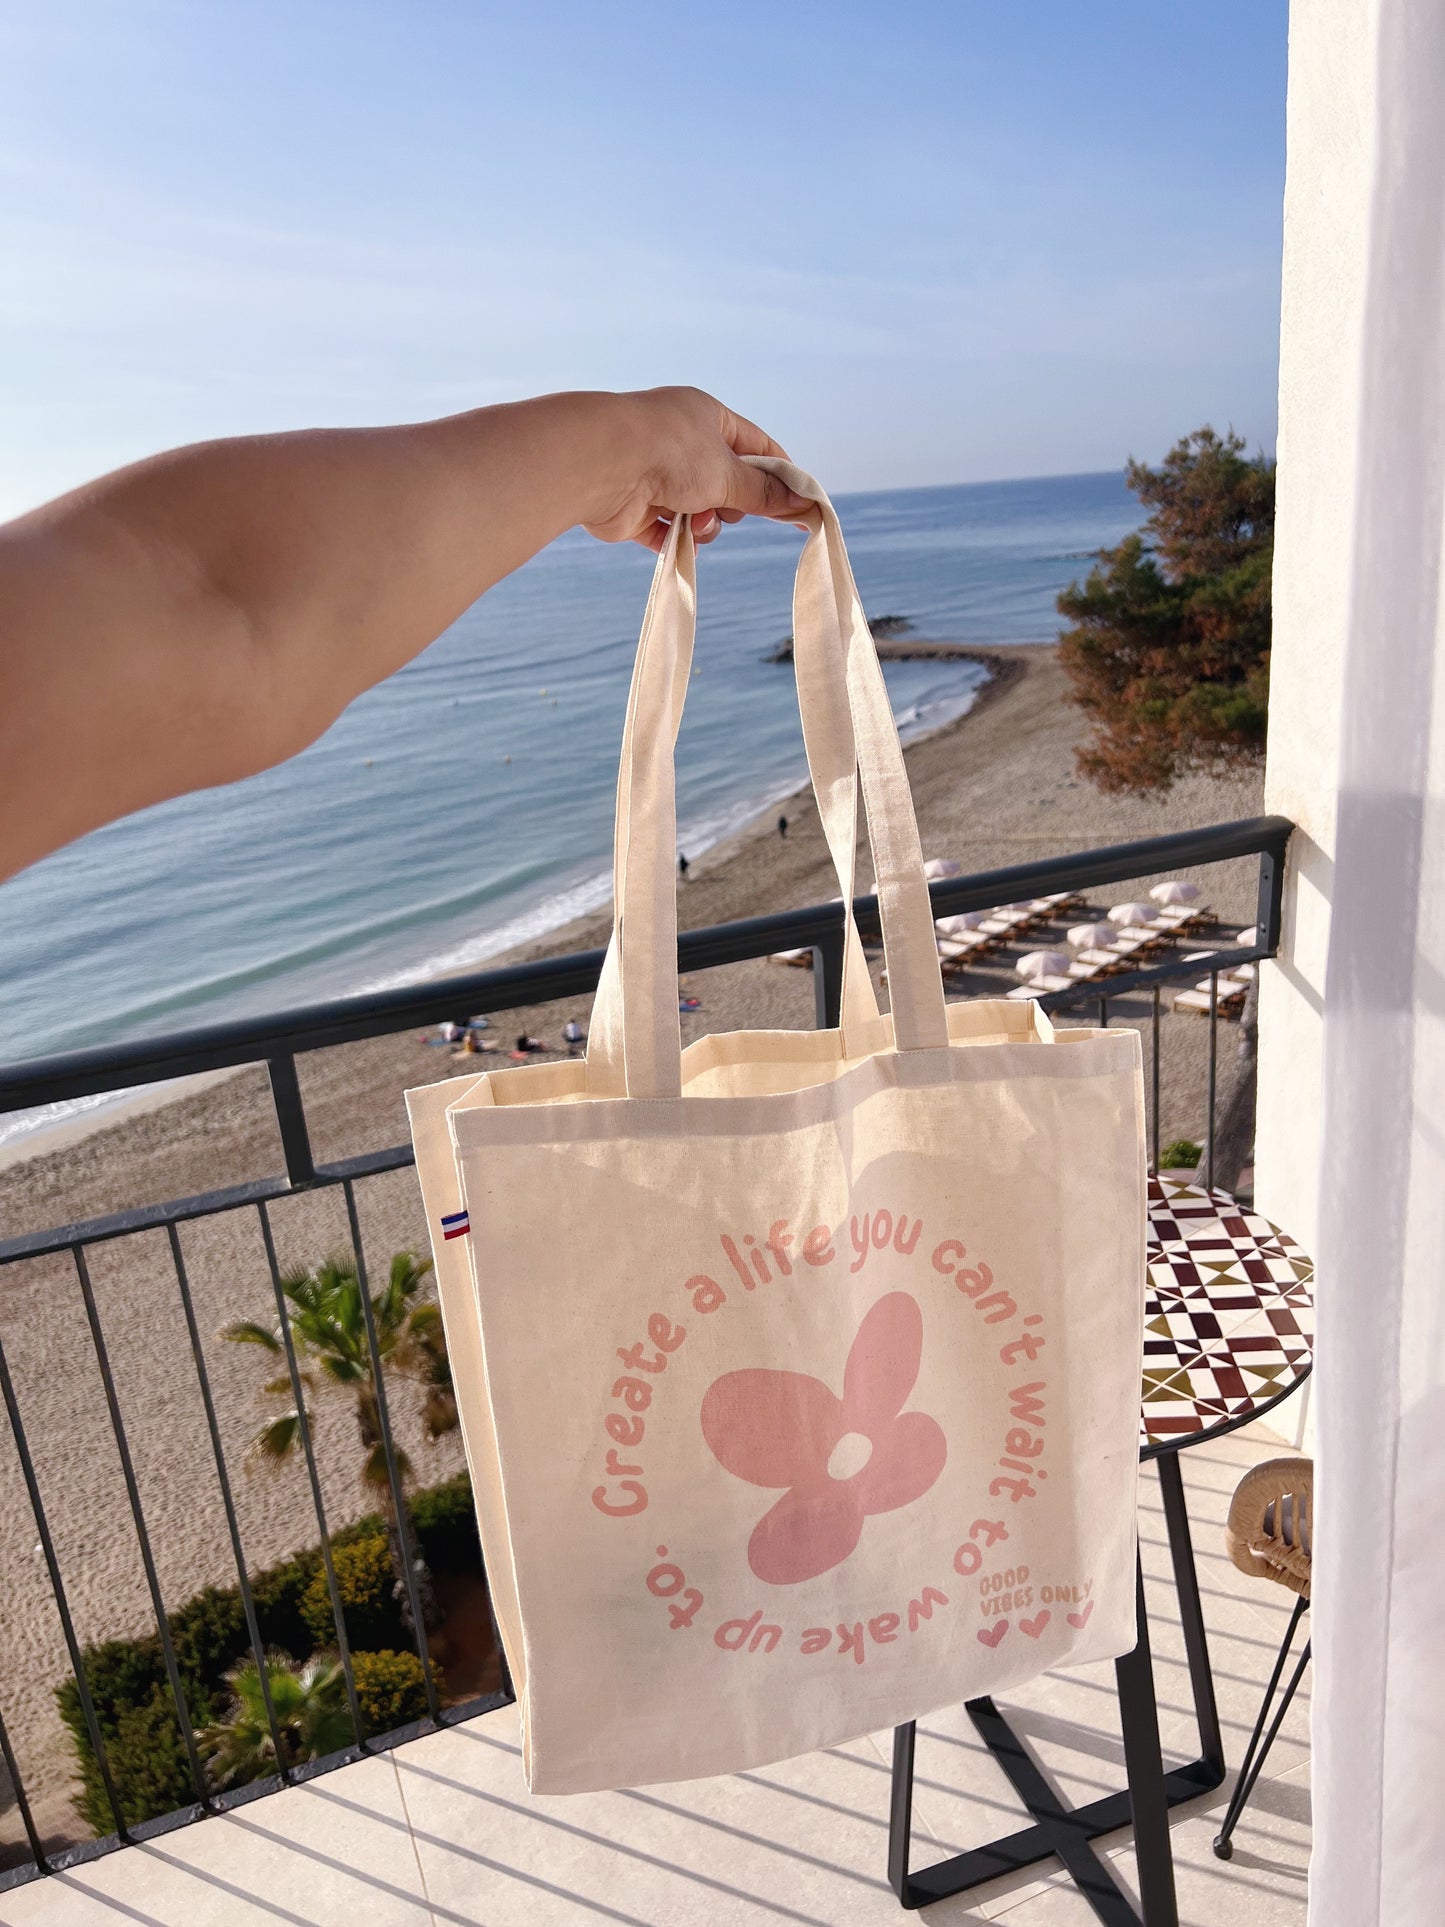 Tote Bag "Create a life you can't wait to wake up to "